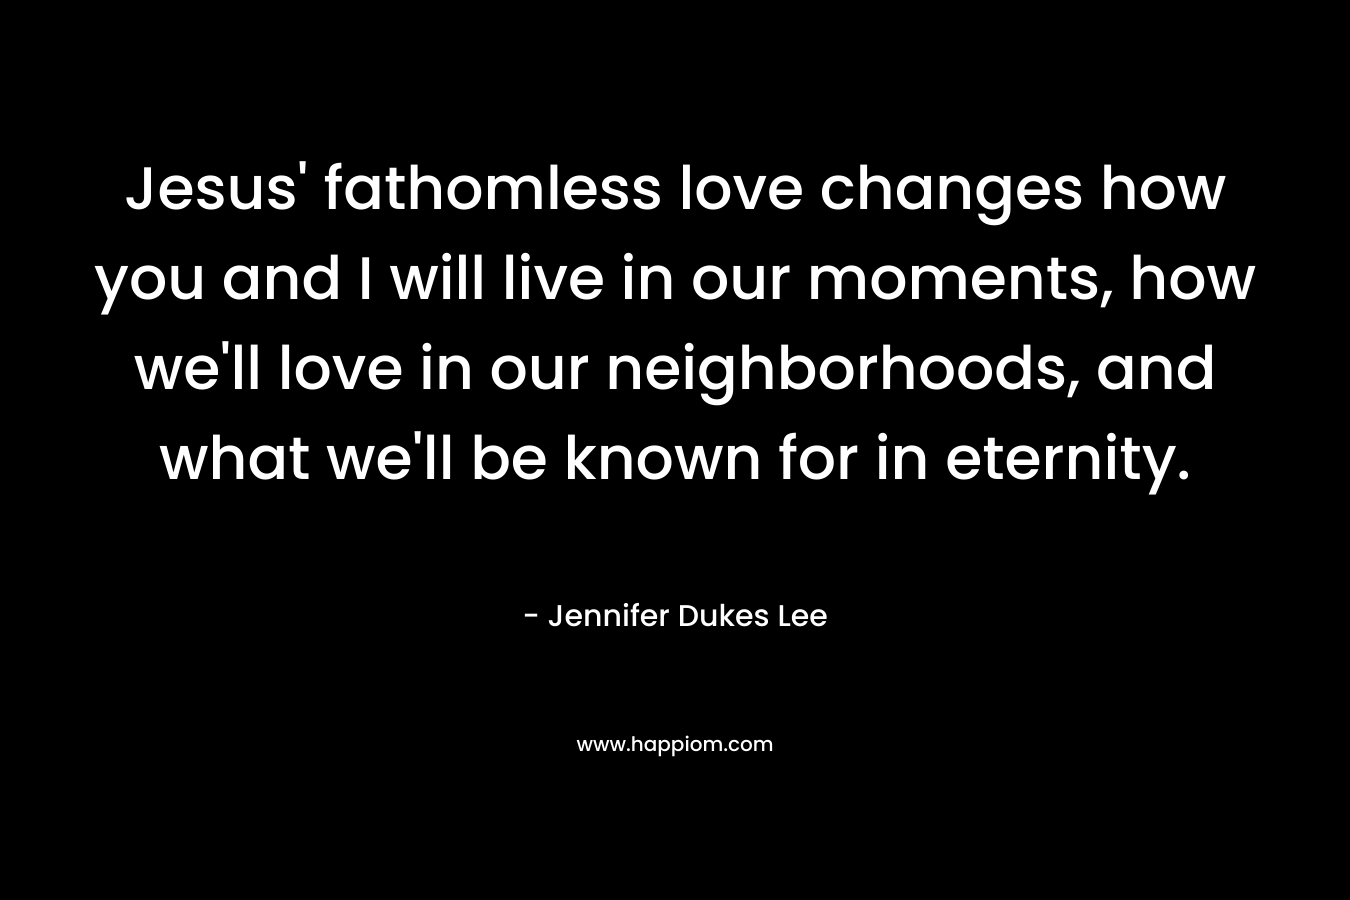 Jesus’ fathomless love changes how you and I will live in our moments, how we’ll love in our neighborhoods, and what we’ll be known for in eternity. – Jennifer Dukes Lee